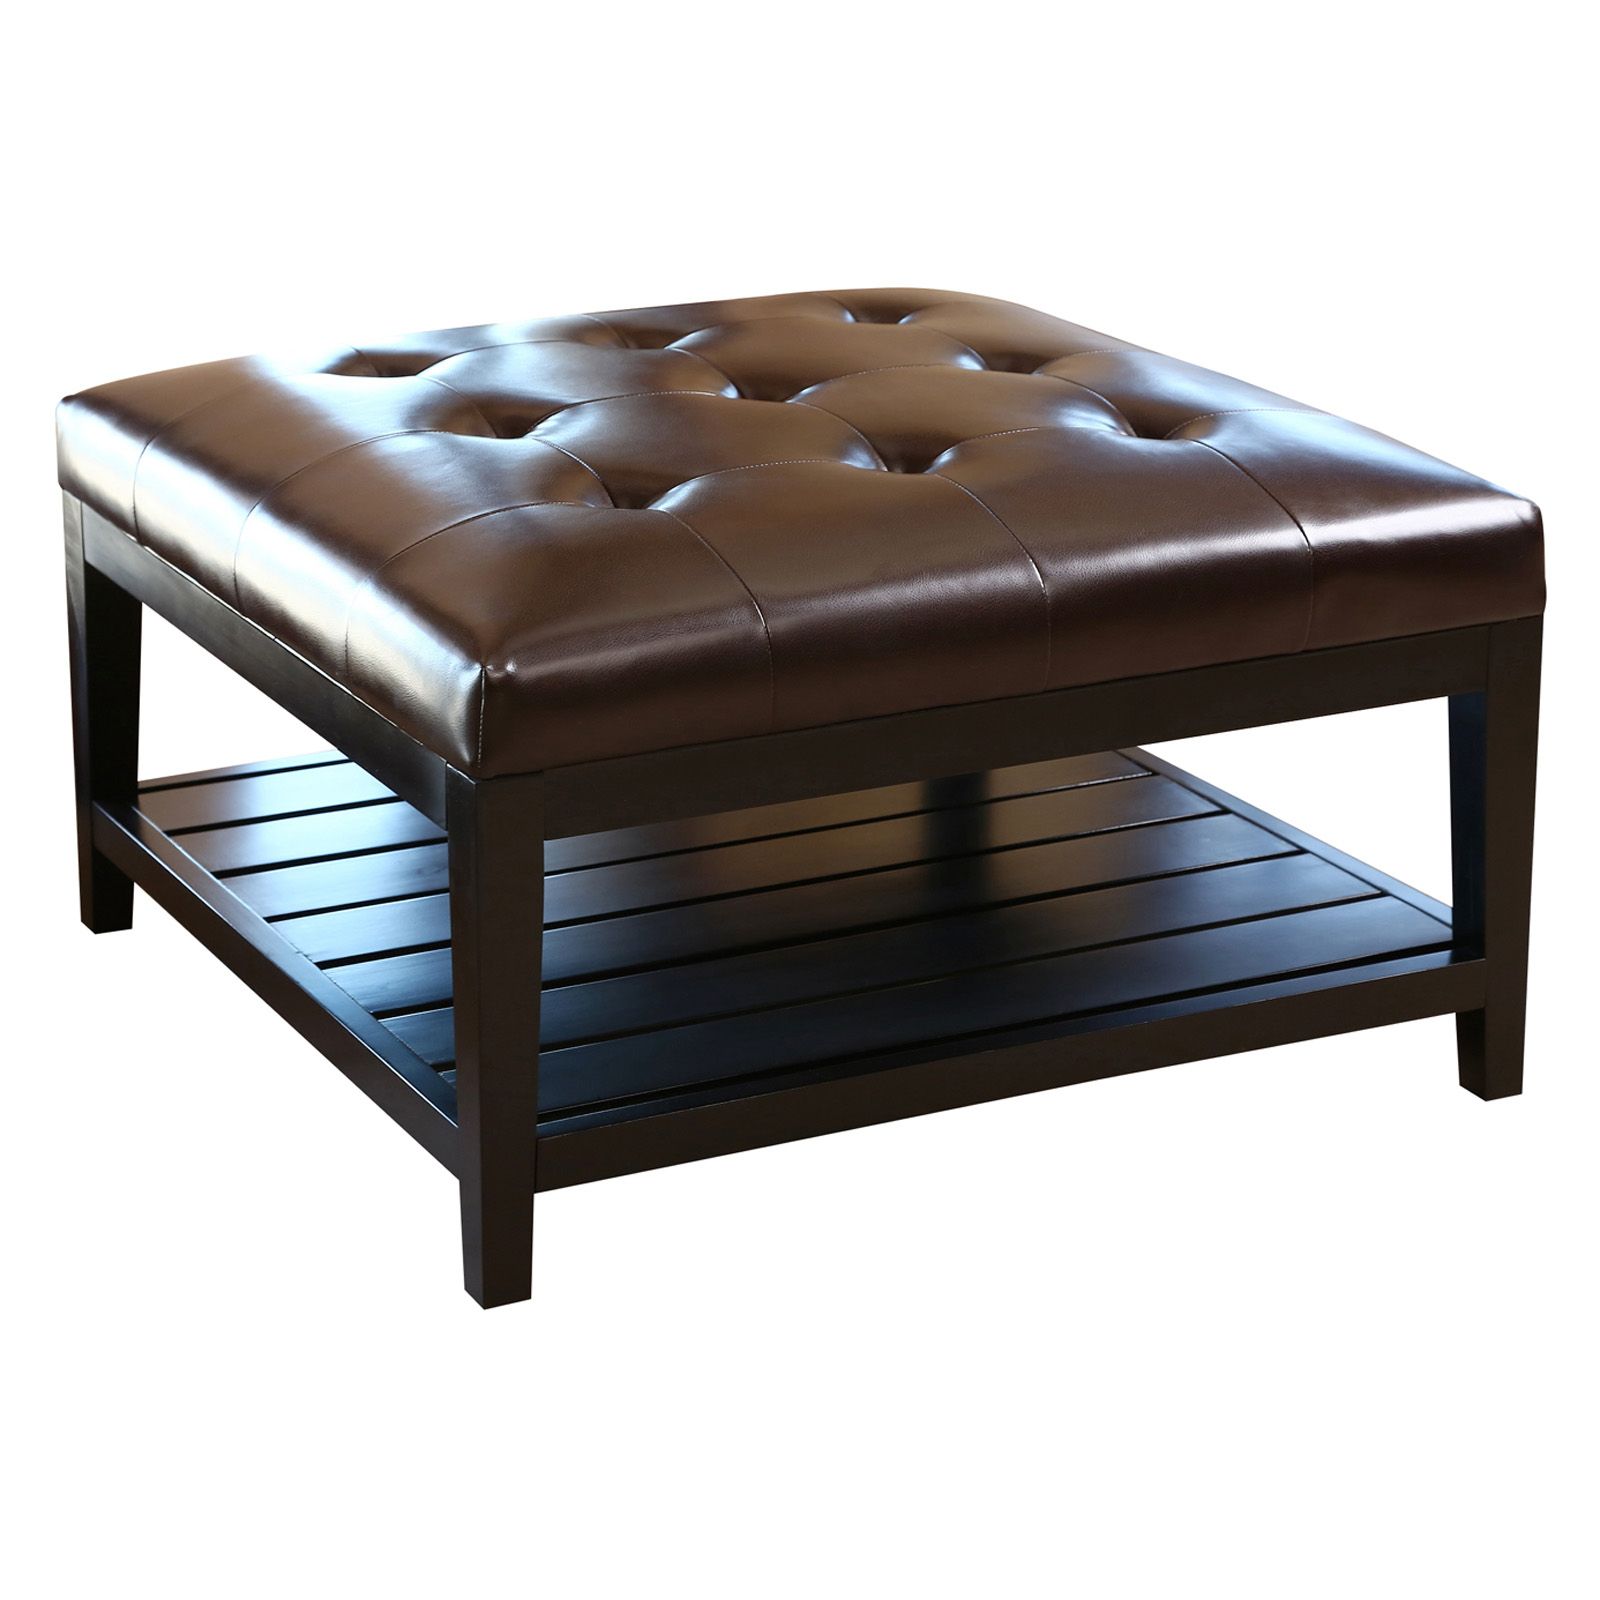 Abbyson Living Villagio Tufted Leather Square Coffee Table For Popular Tufted Ottoman Console Tables (View 5 of 10)